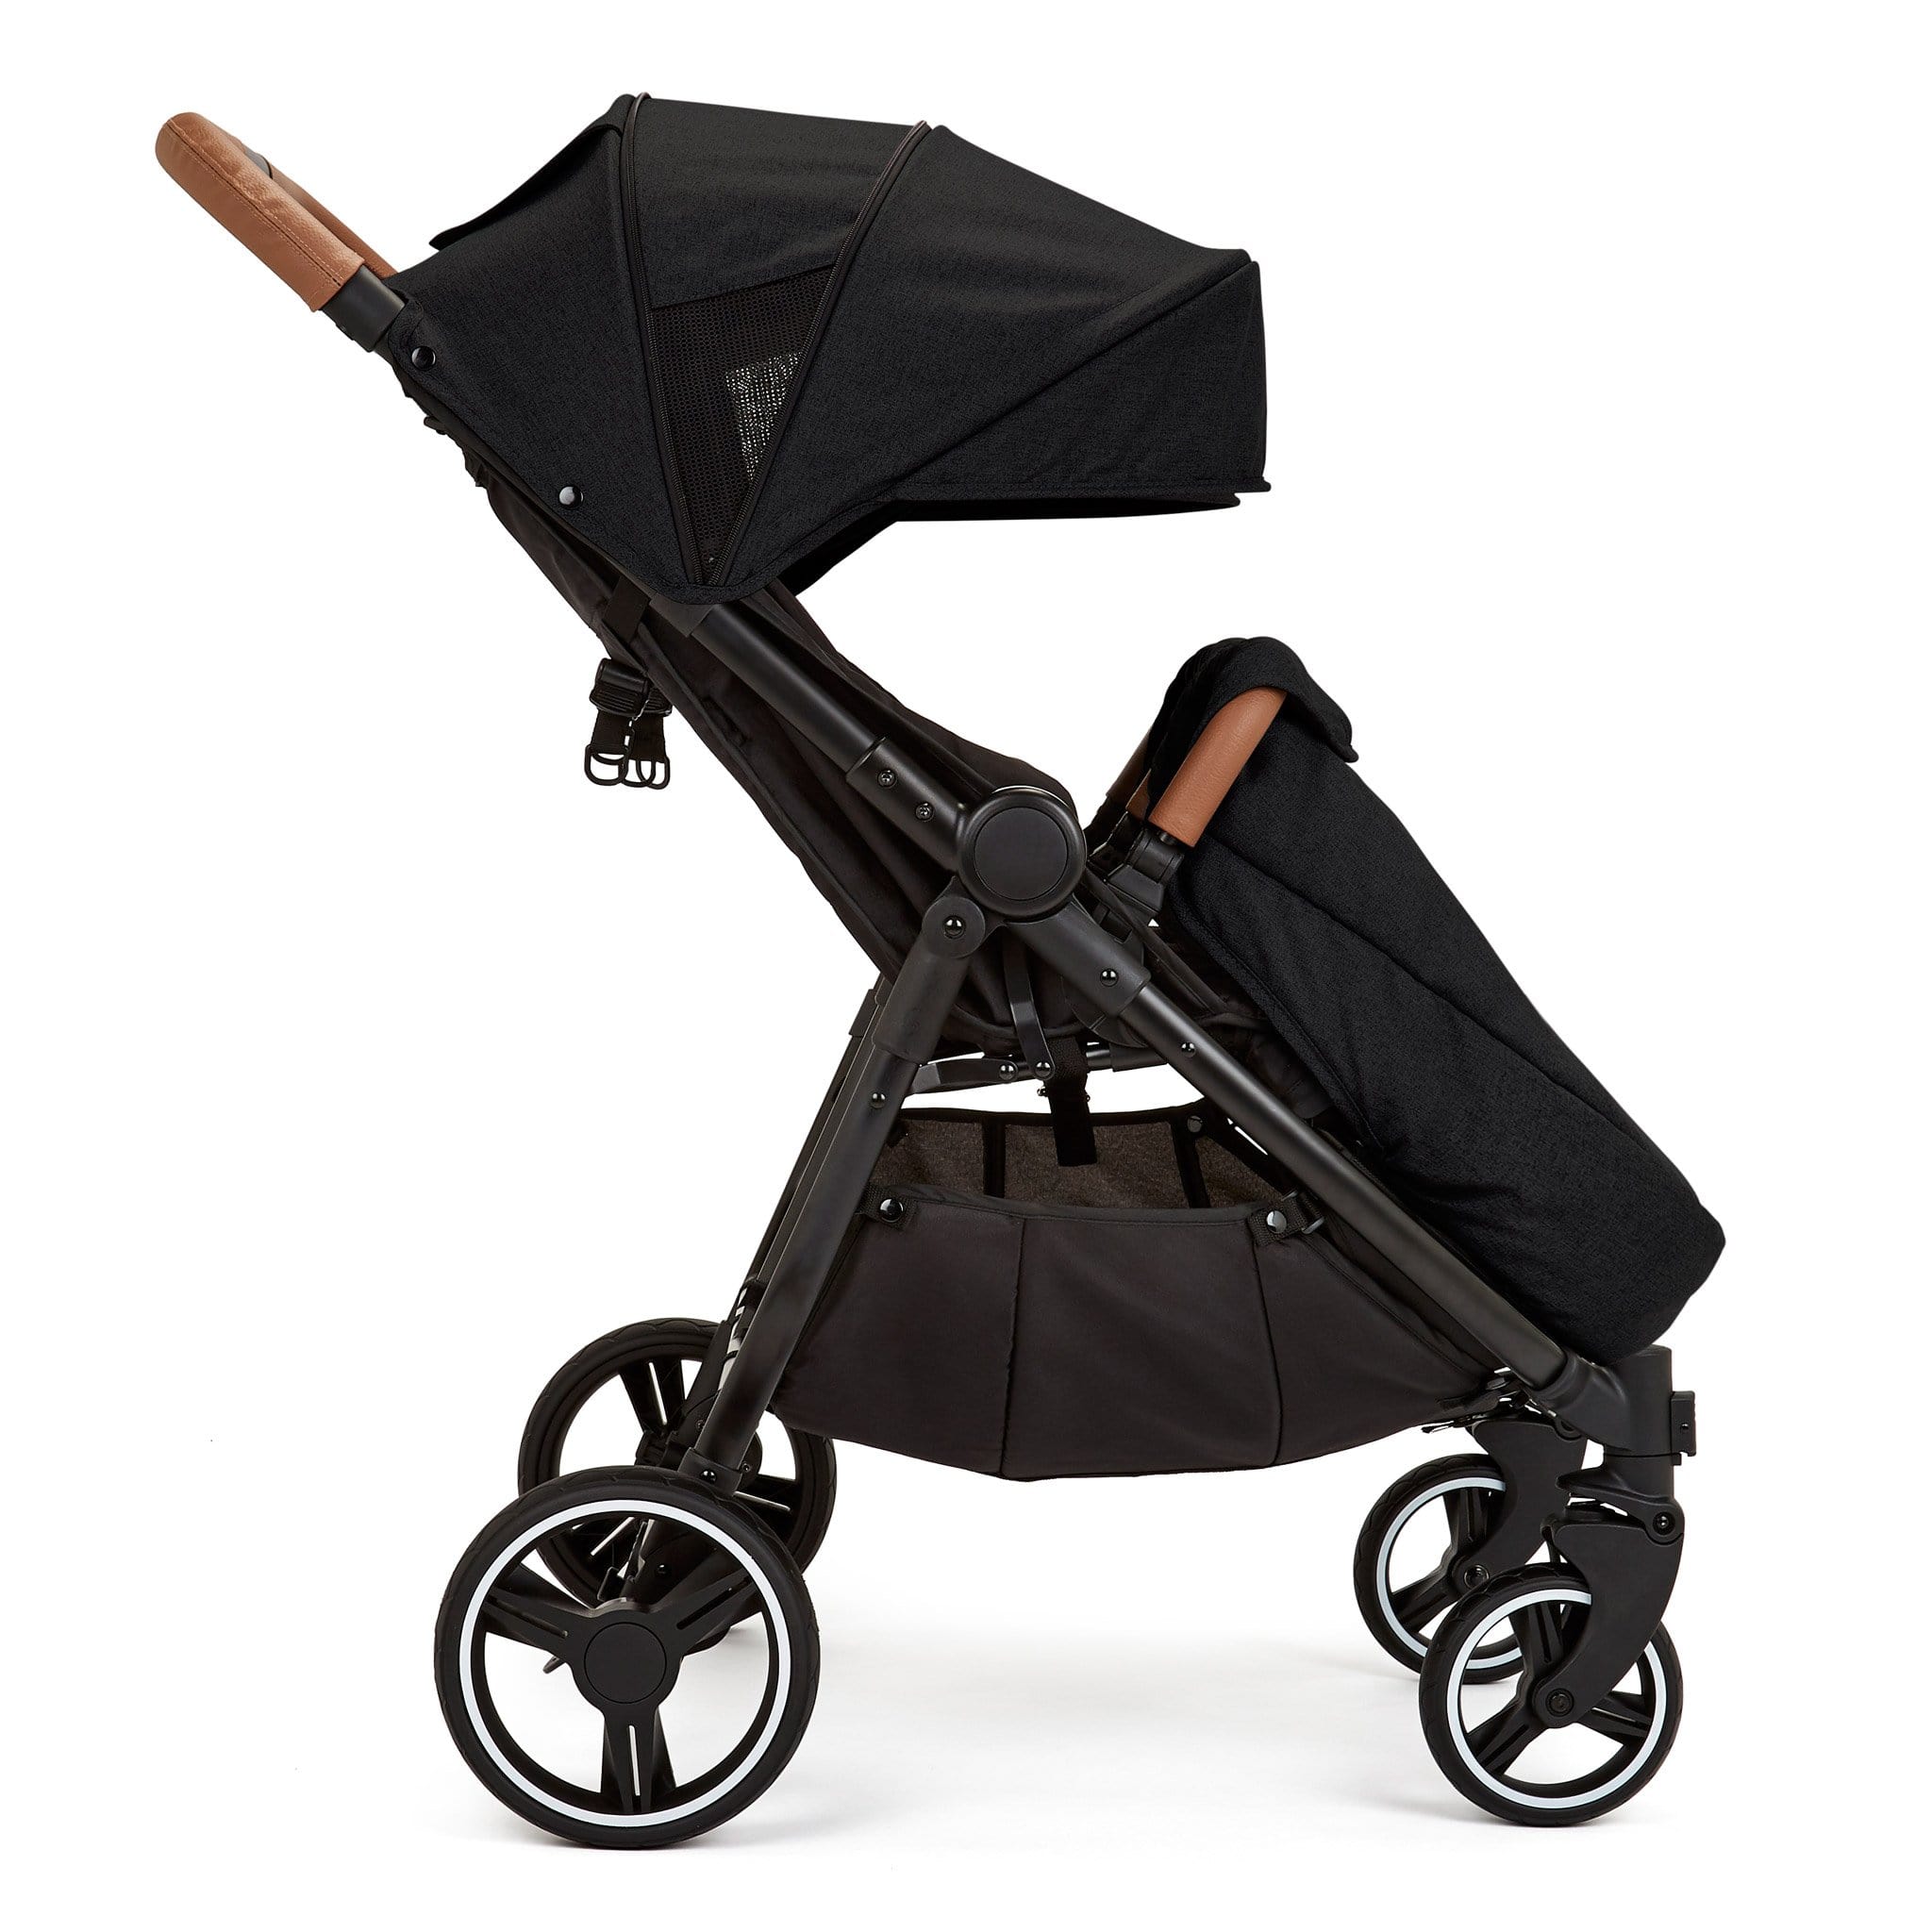 Ickle Bubba double buggies Ickle Bubba Venus Max Double Stroller Black/Black/Tan 16-004-200-003